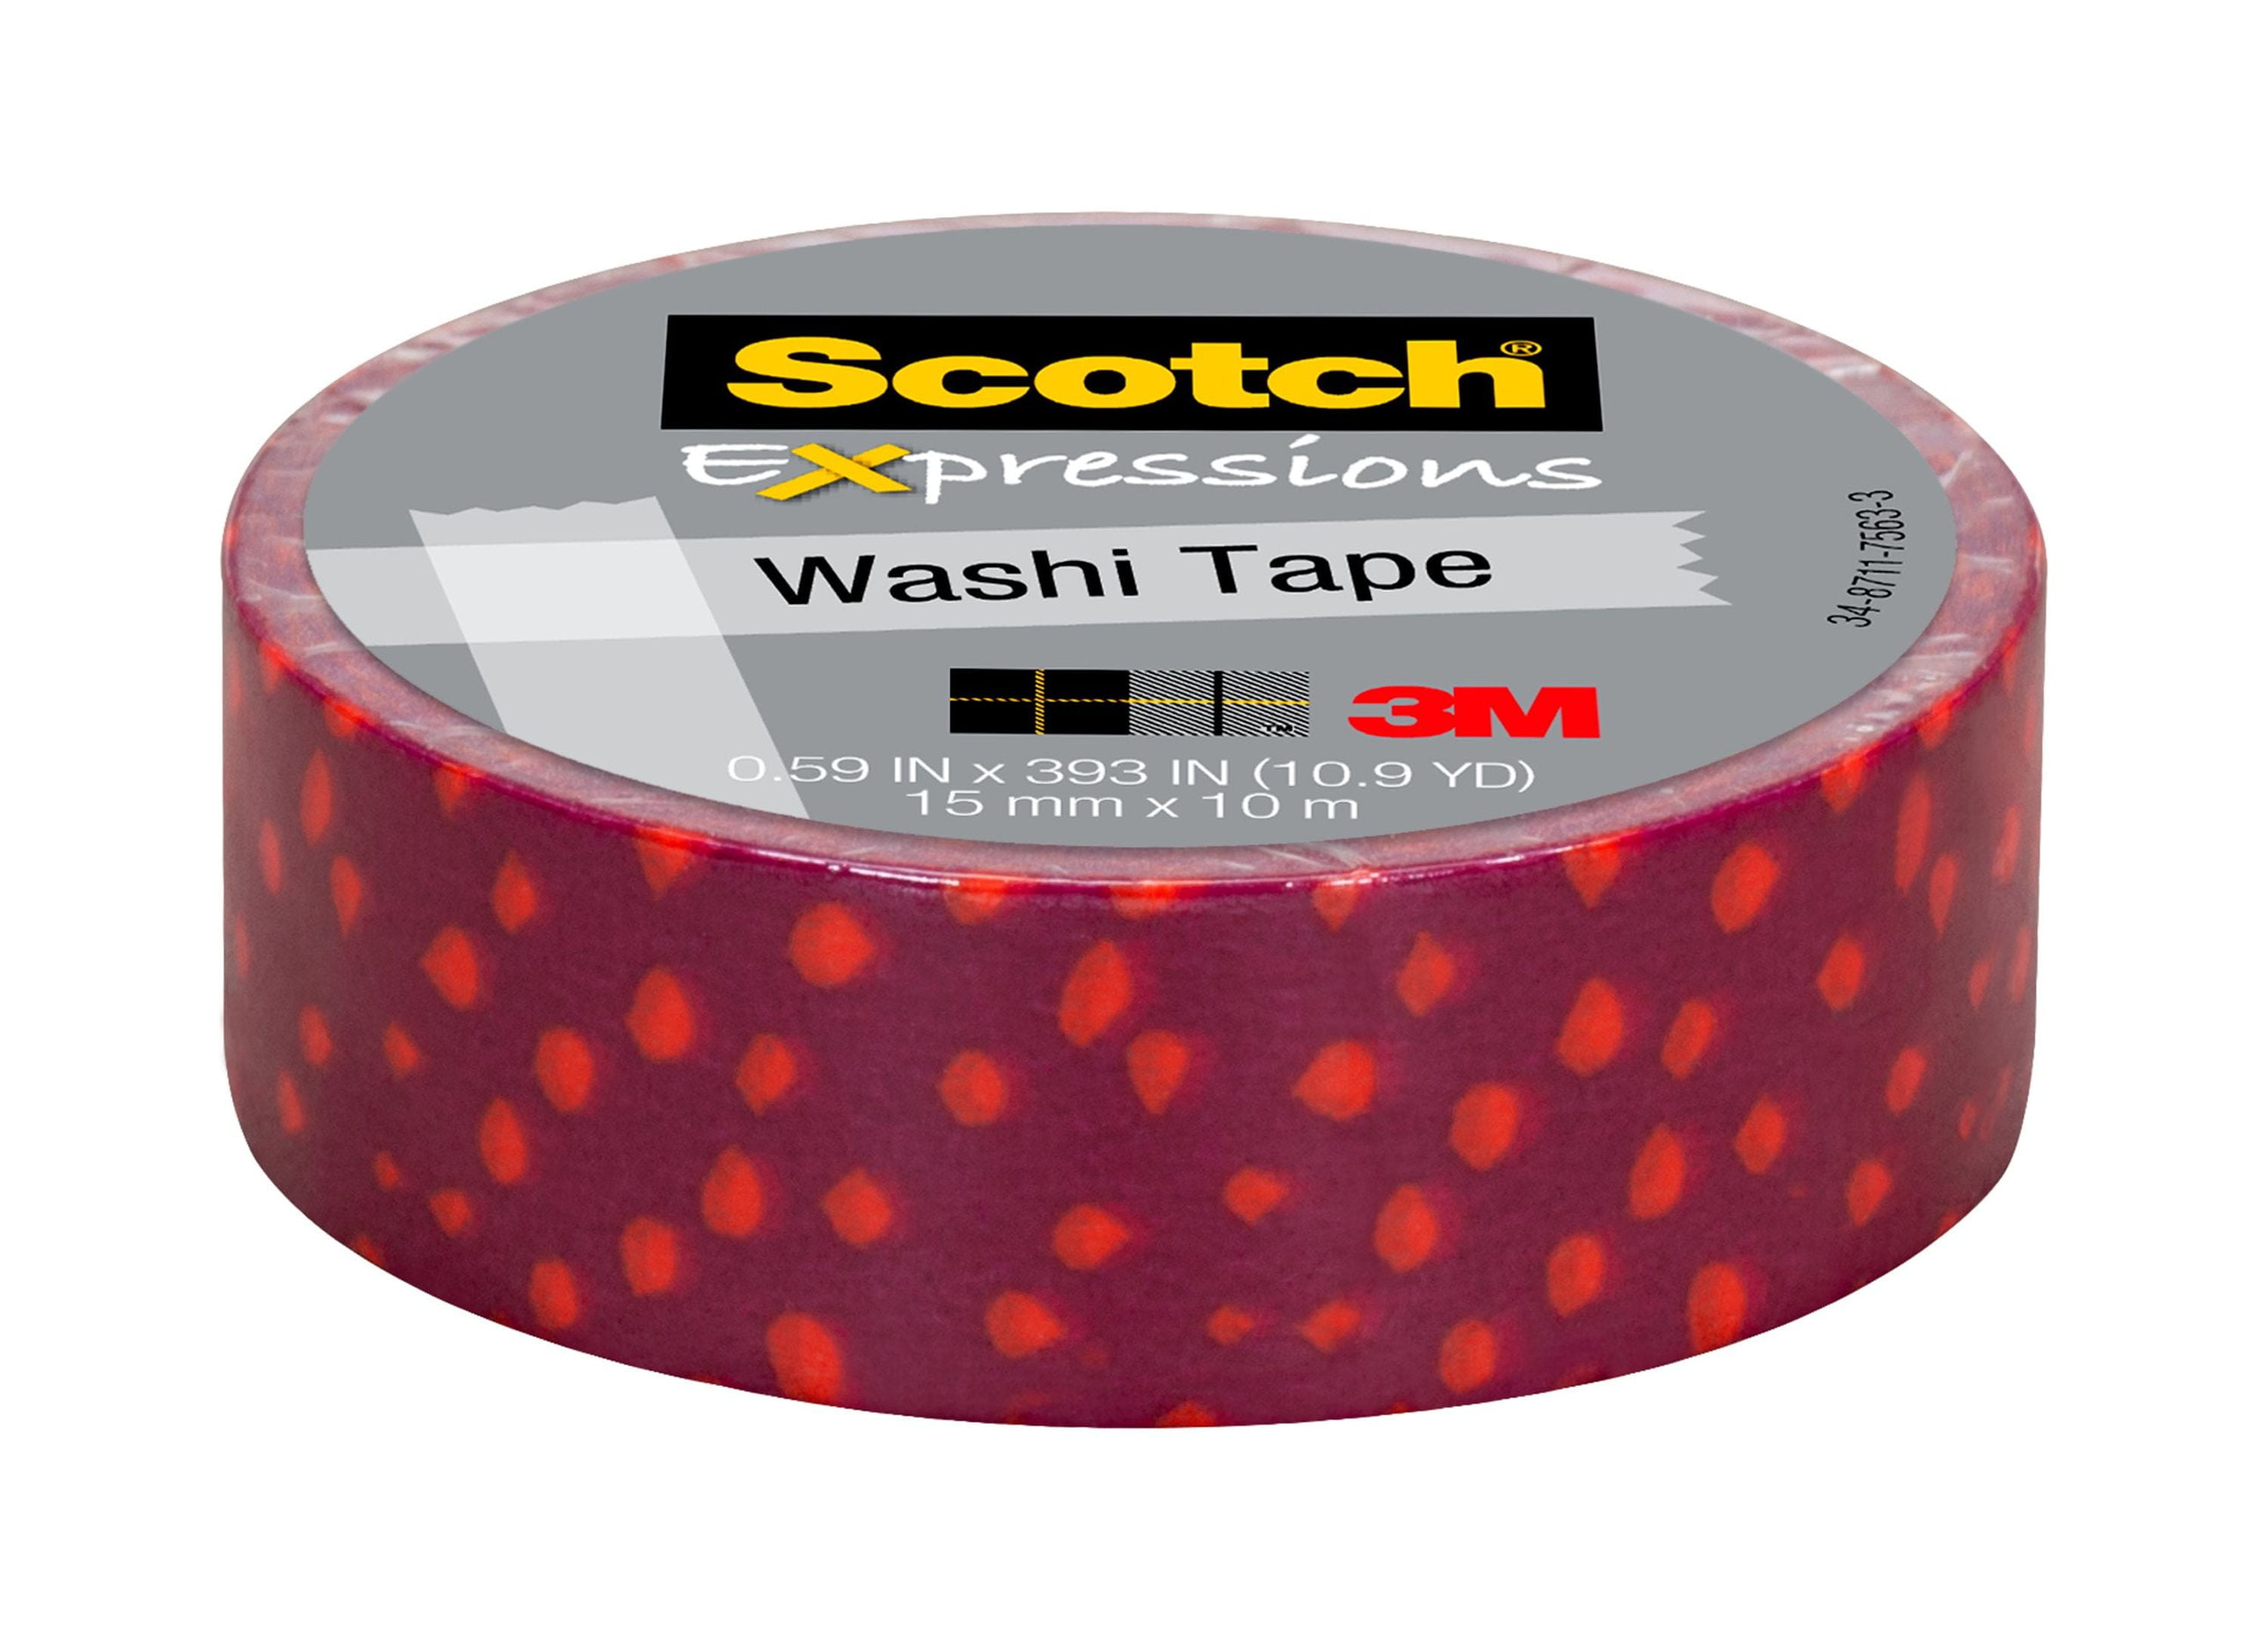 SCOTCH EXPRESSIONS WASHI TAPE C1017-3-P32 ASSTED